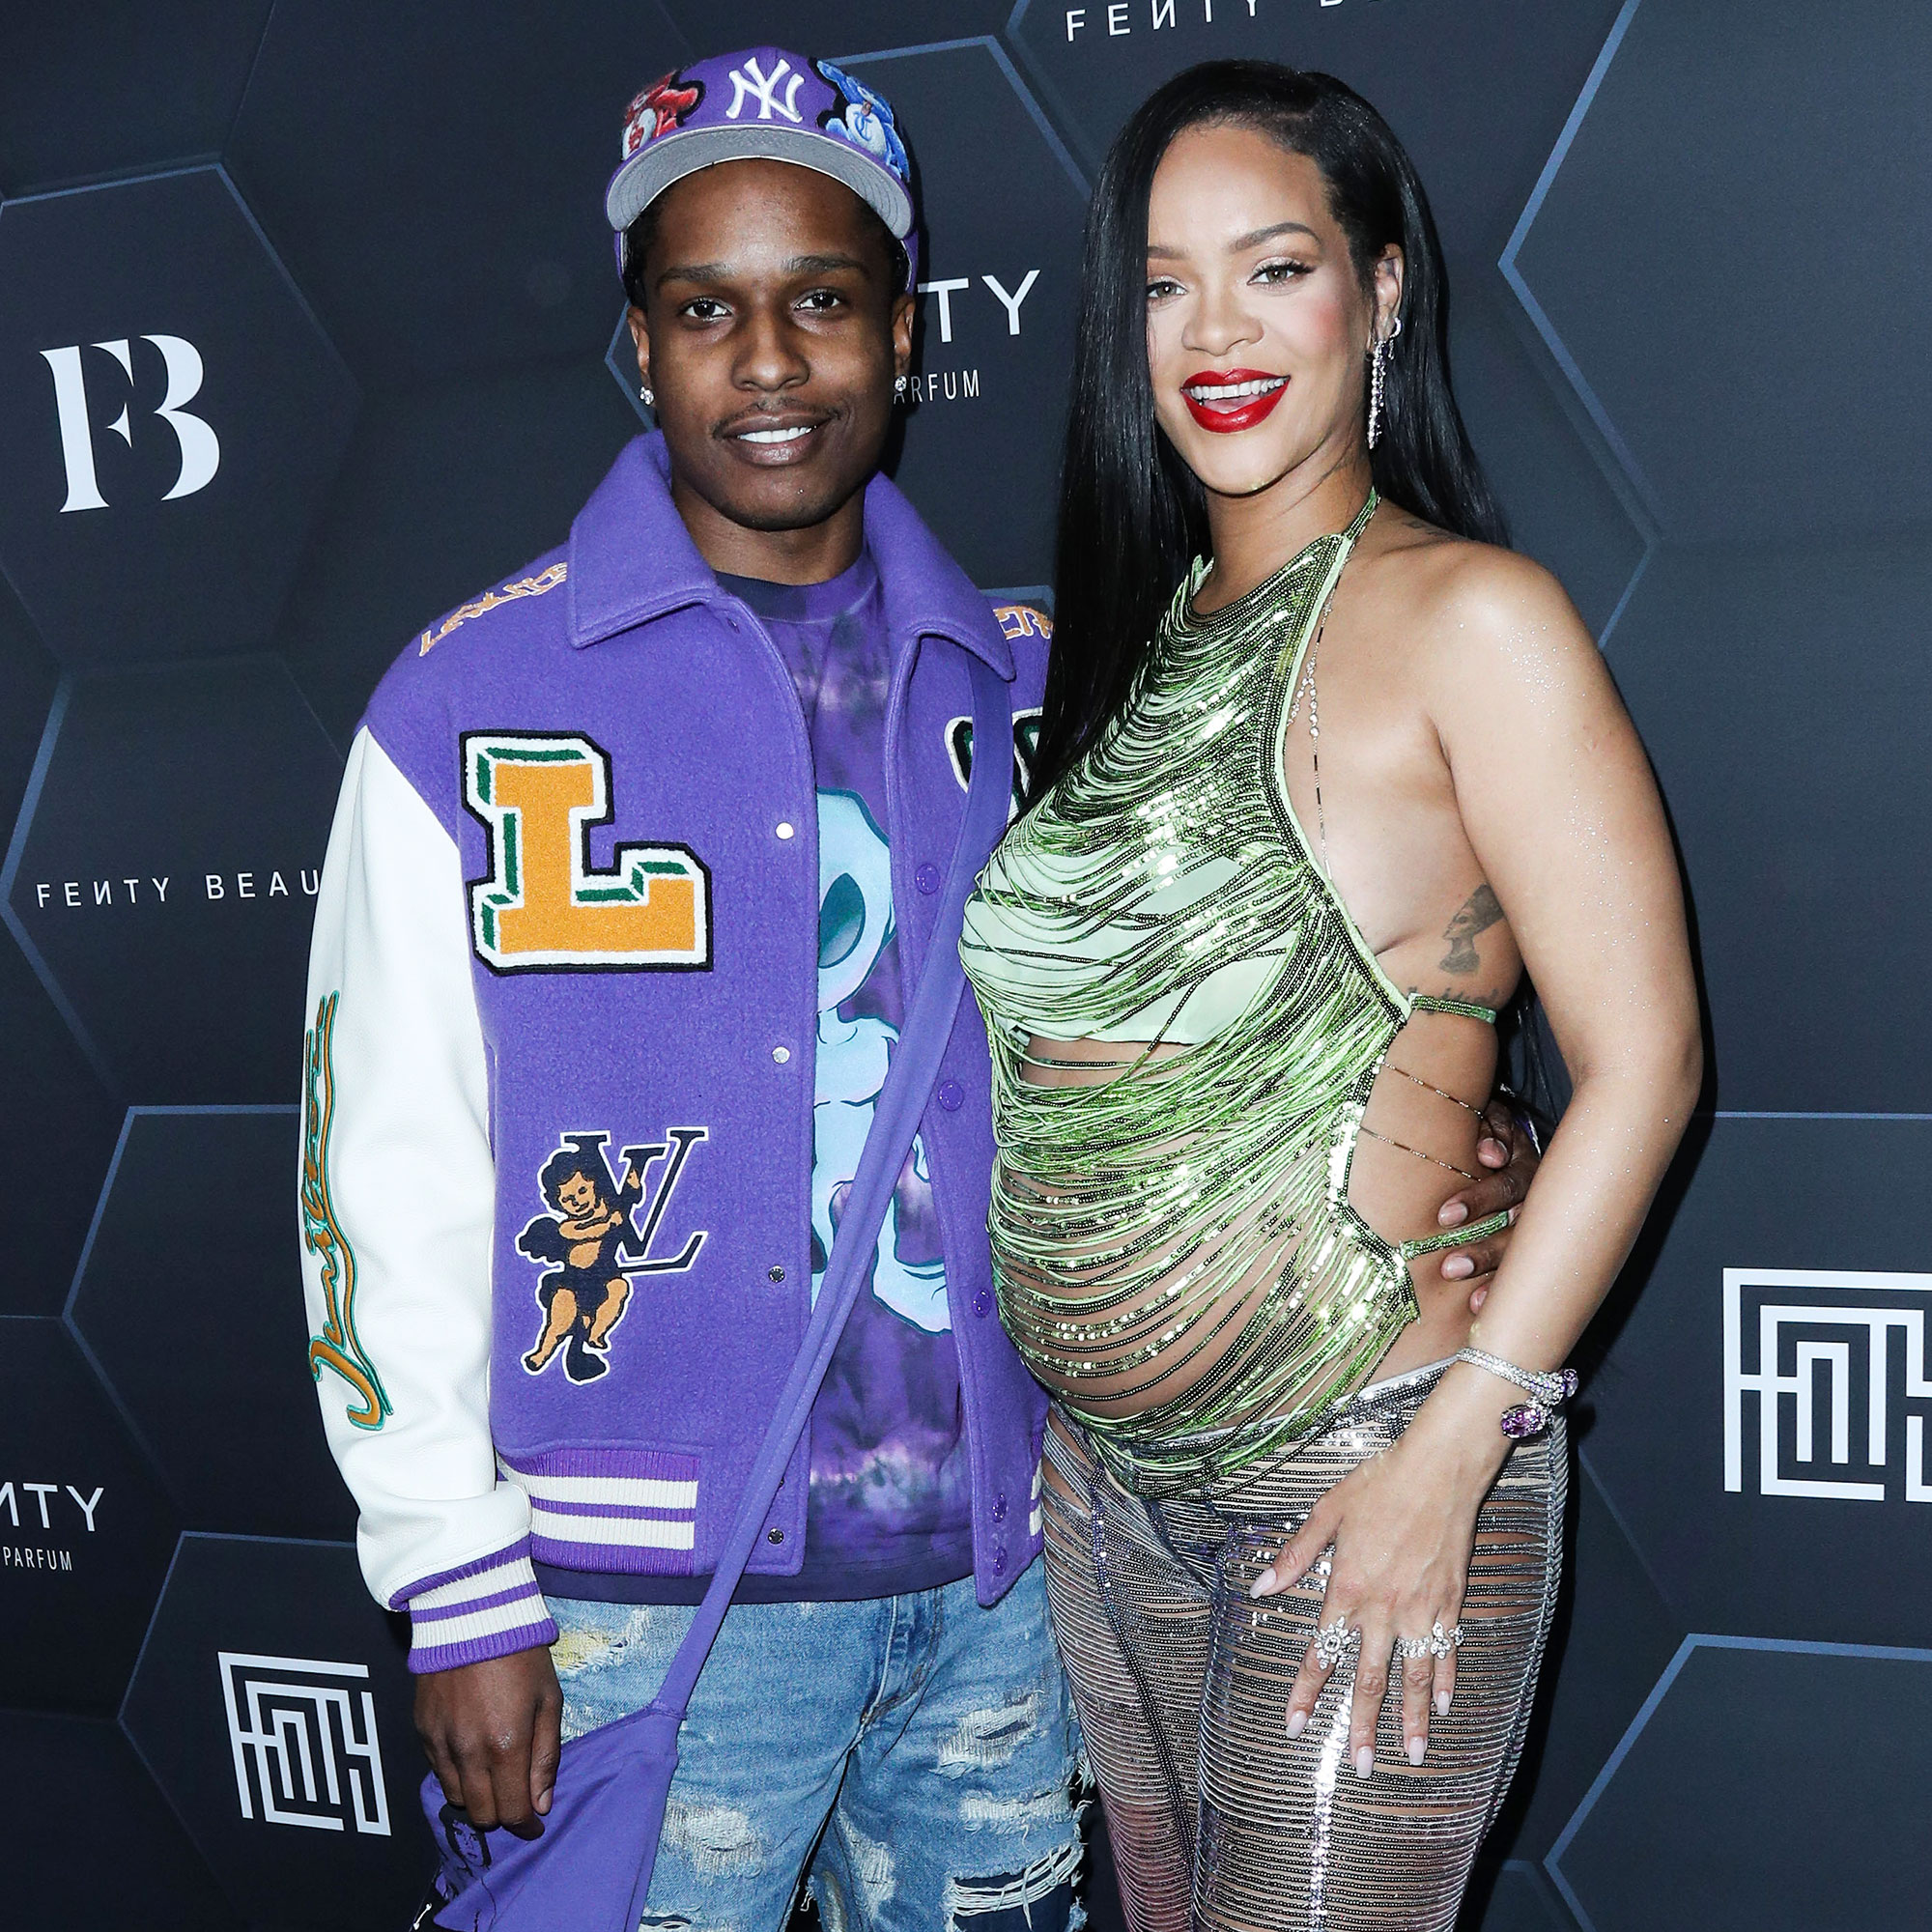 Pregnant Rihanna goes on romantic date with A$AP Rocky after stepping down  as Savage X Fenty CEO